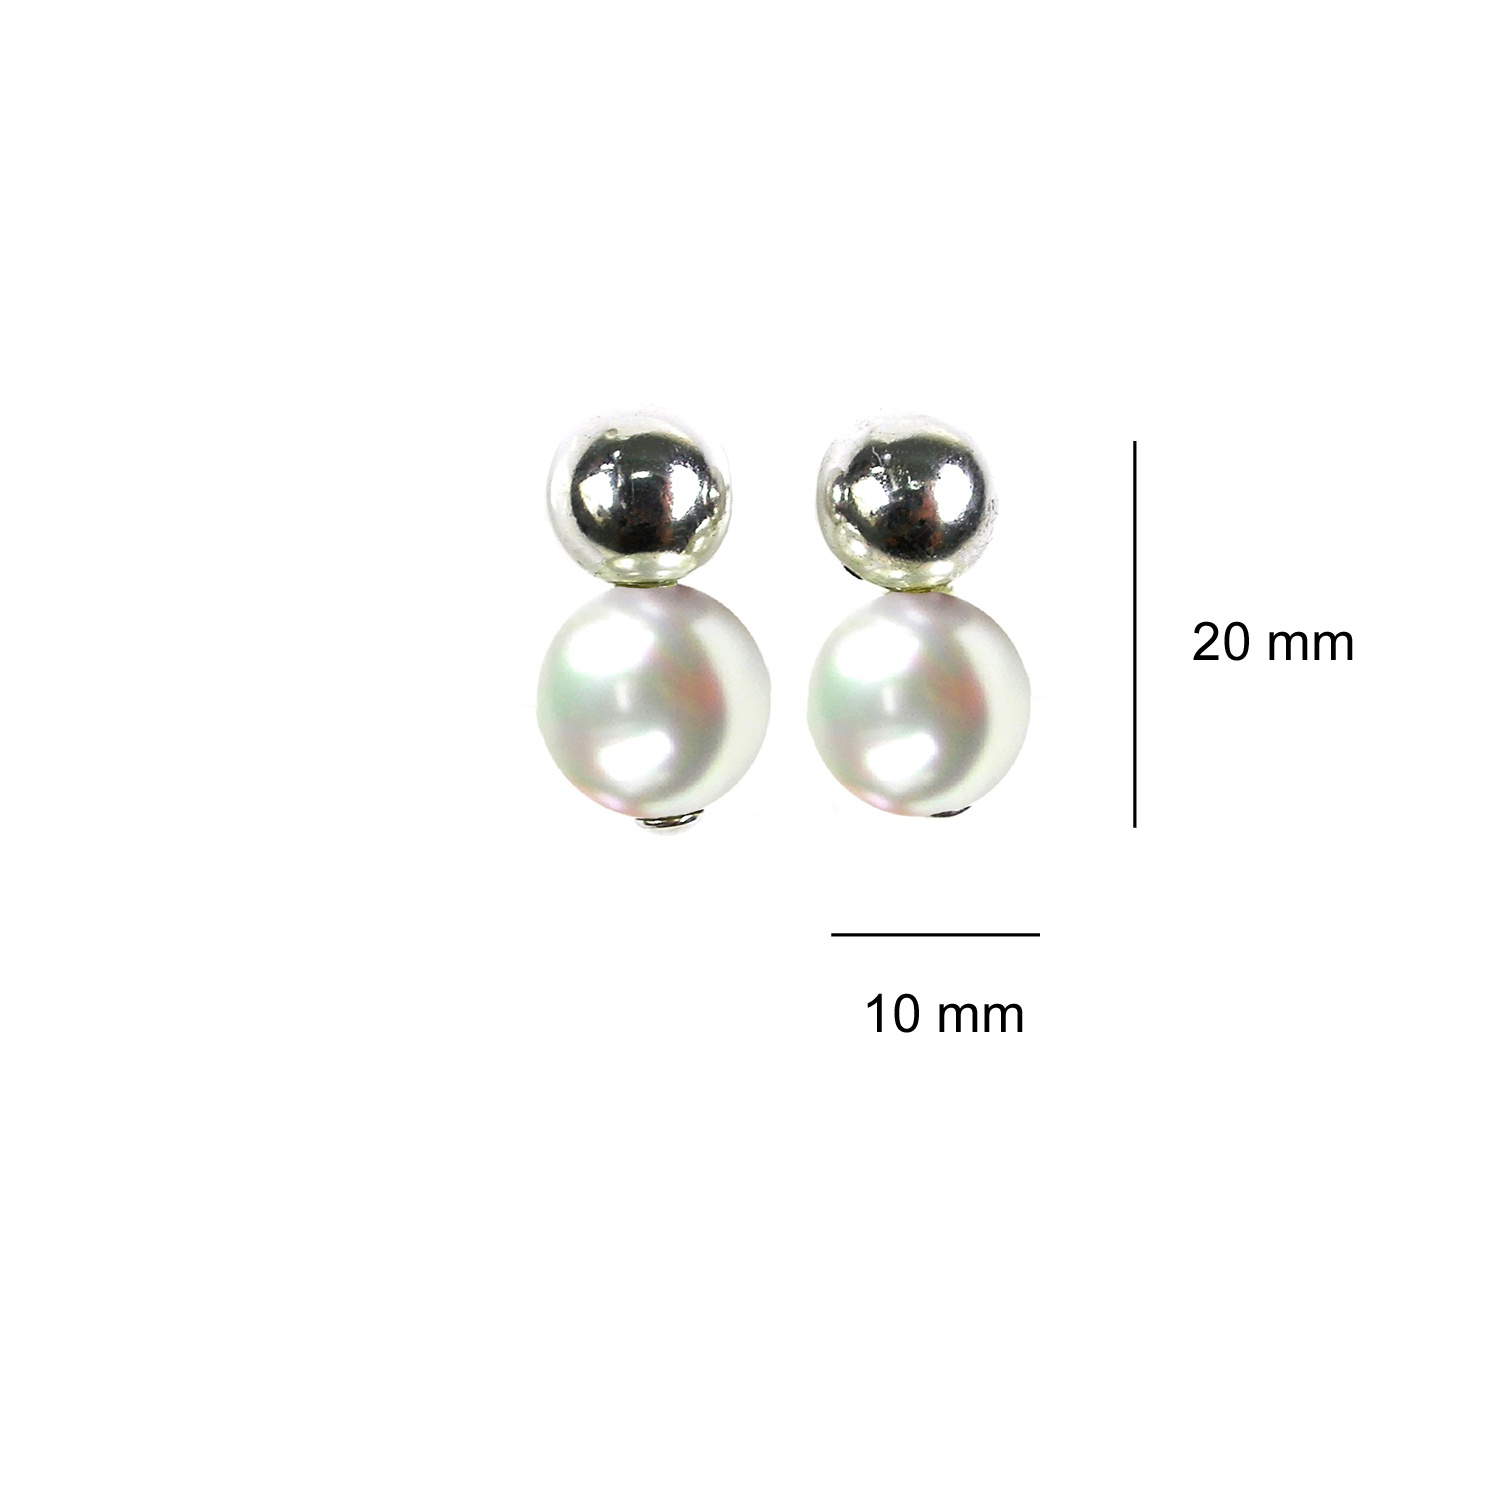 Earrings in Sterling Silver with lovely 10 mm. White Pearls 2